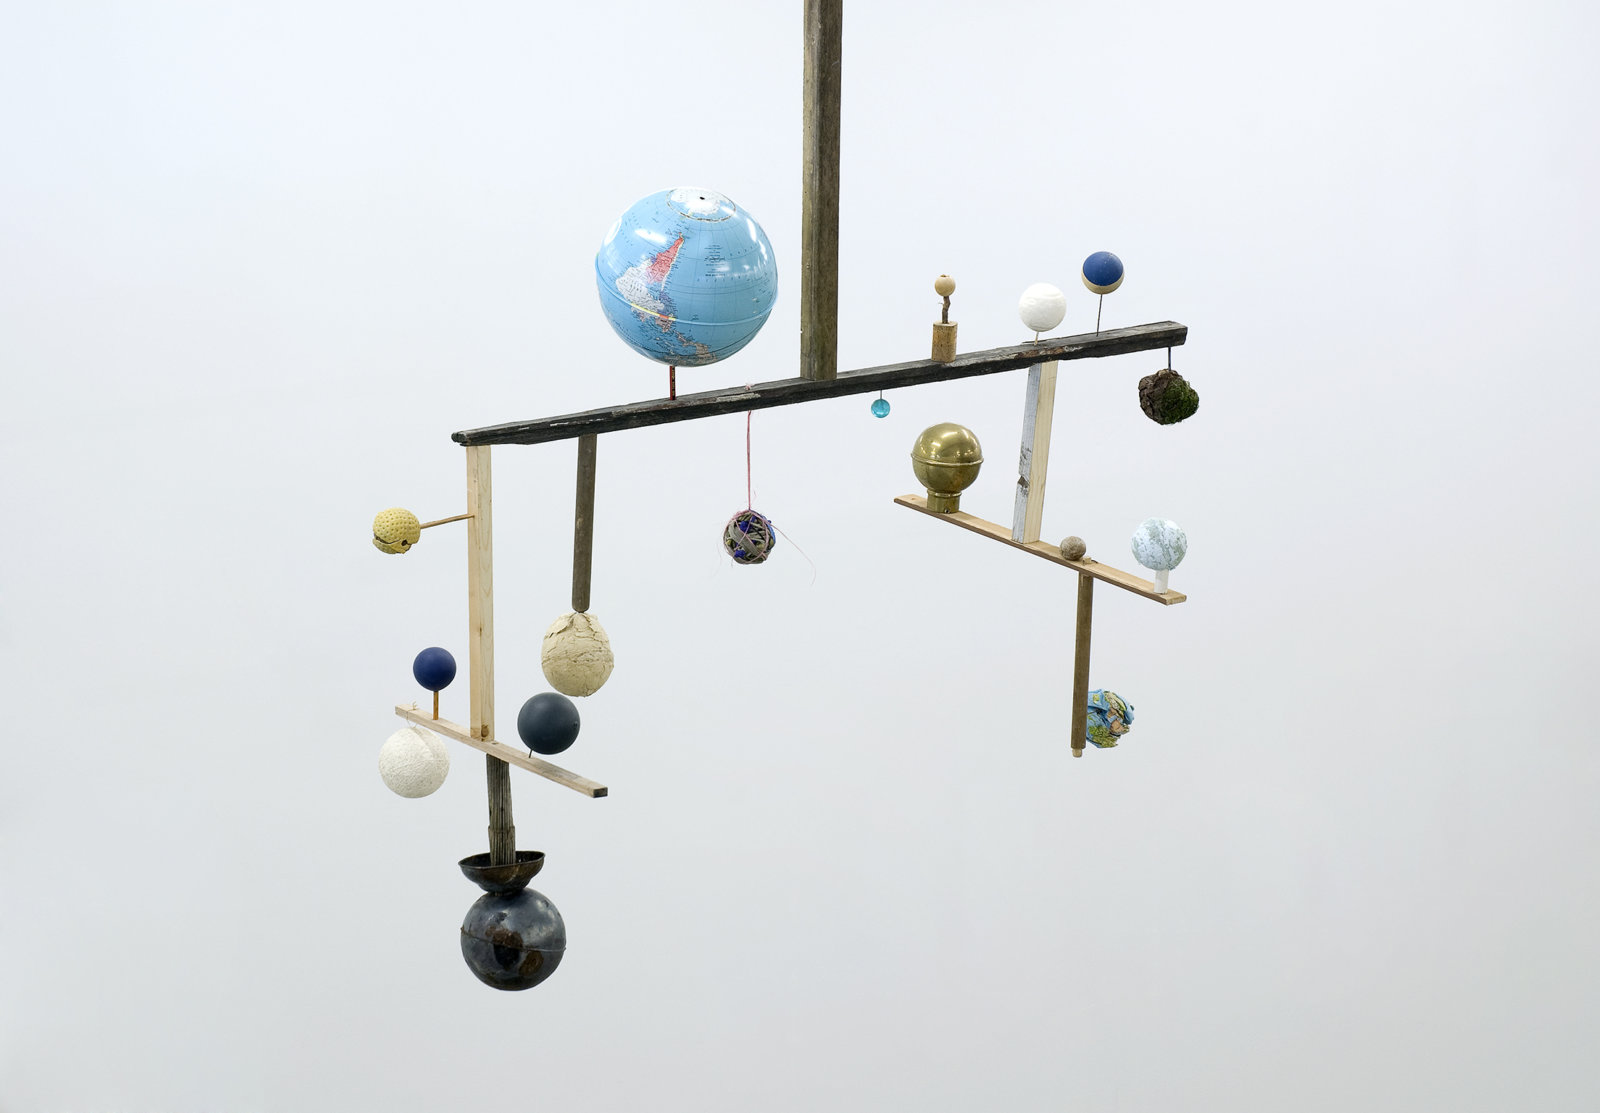 Ashes Withyman, Crown Compass (from Uncertain Pilgrimage), 2009, globes, balls, paint, scrap material, 103 x 22 x 54 in. (262 x 57 x 137 cm)